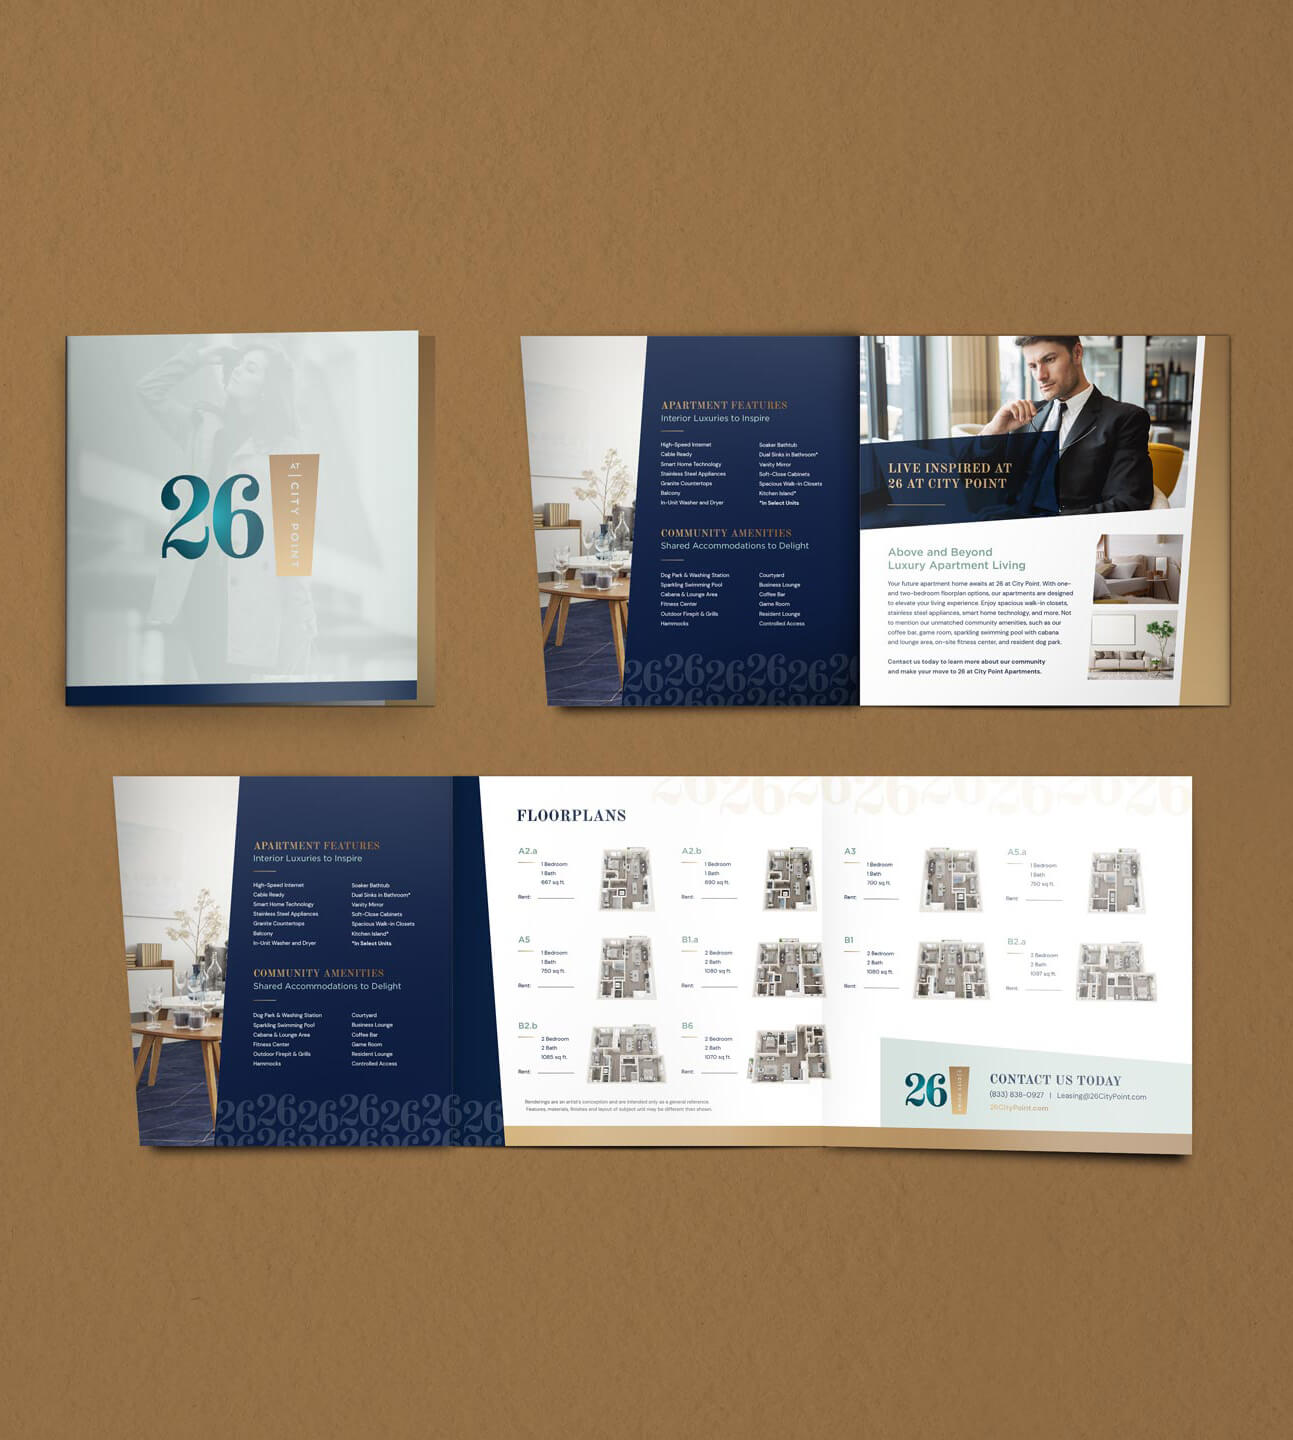 An example of multifamily marketing materials we designed for our client as part of our multifamily branding services at Criterion.B.